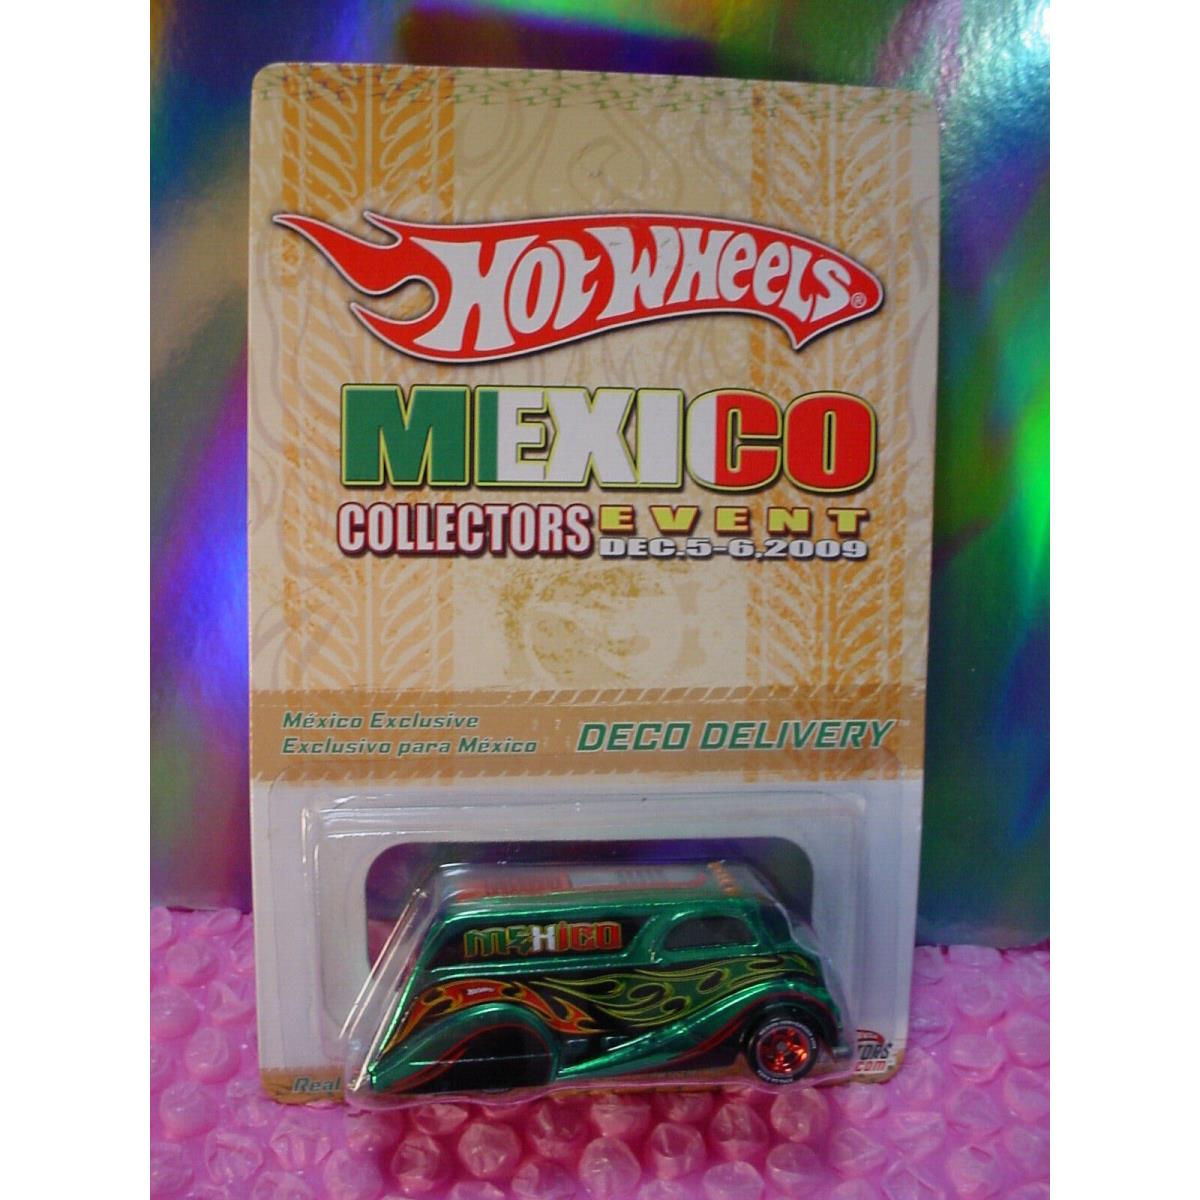 Rlc 2009 Hot Wheels Mexico Collectors Deco Delivery Green Real Riders Hologram